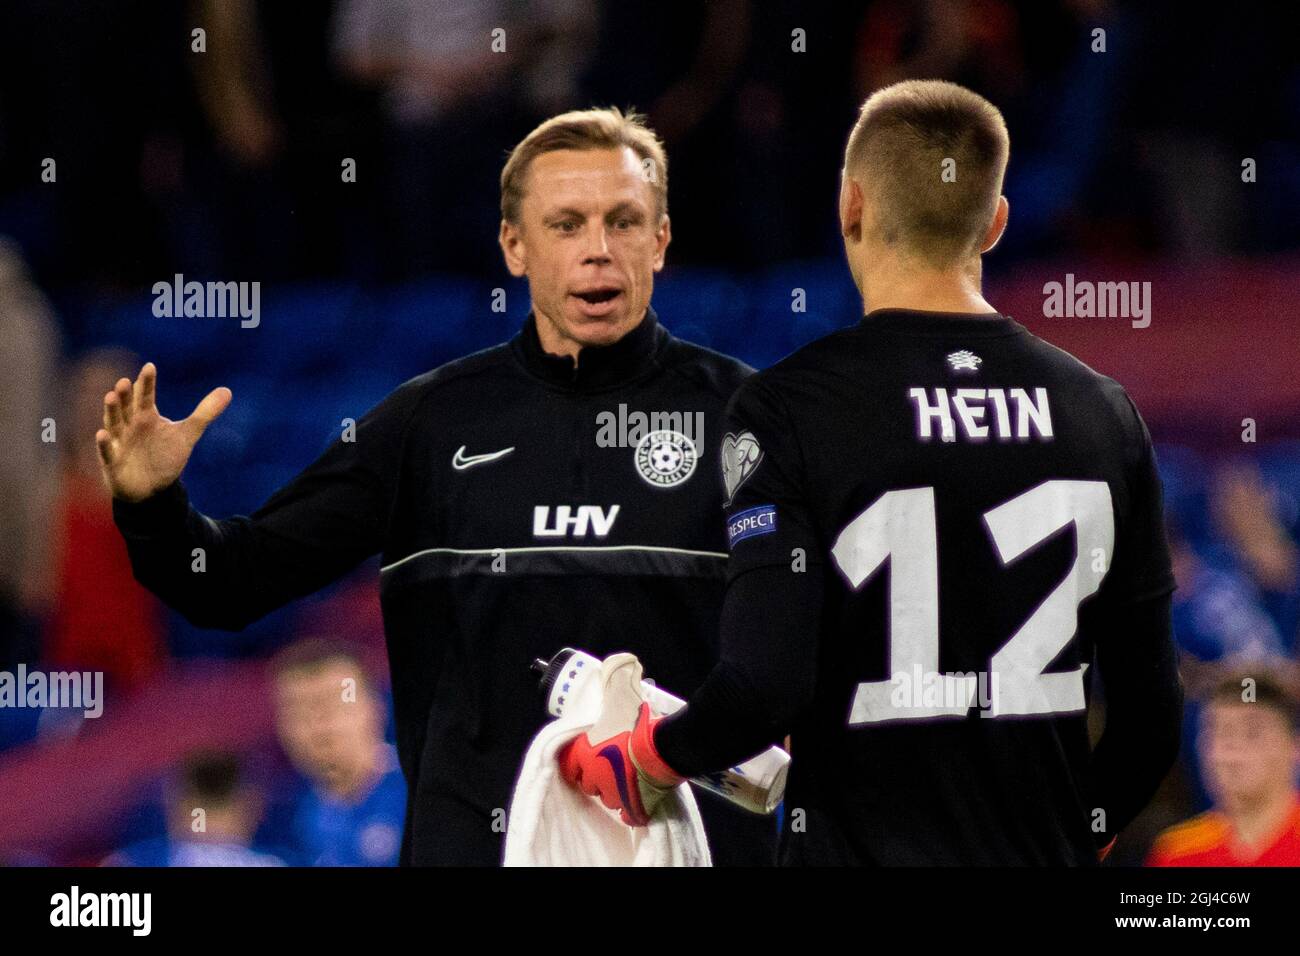 Cardiff, UK. 08th Sep, 2021. Estonia goalkeeper Karl Jakob Hein is congratulated at full time. Wales v Estonia in a 2022 FIFA World Cup Qualifier at the Cardiff City Stadium on the 8th September 2021. Credit: Lewis Mitchell/Alamy Live News Stock Photo